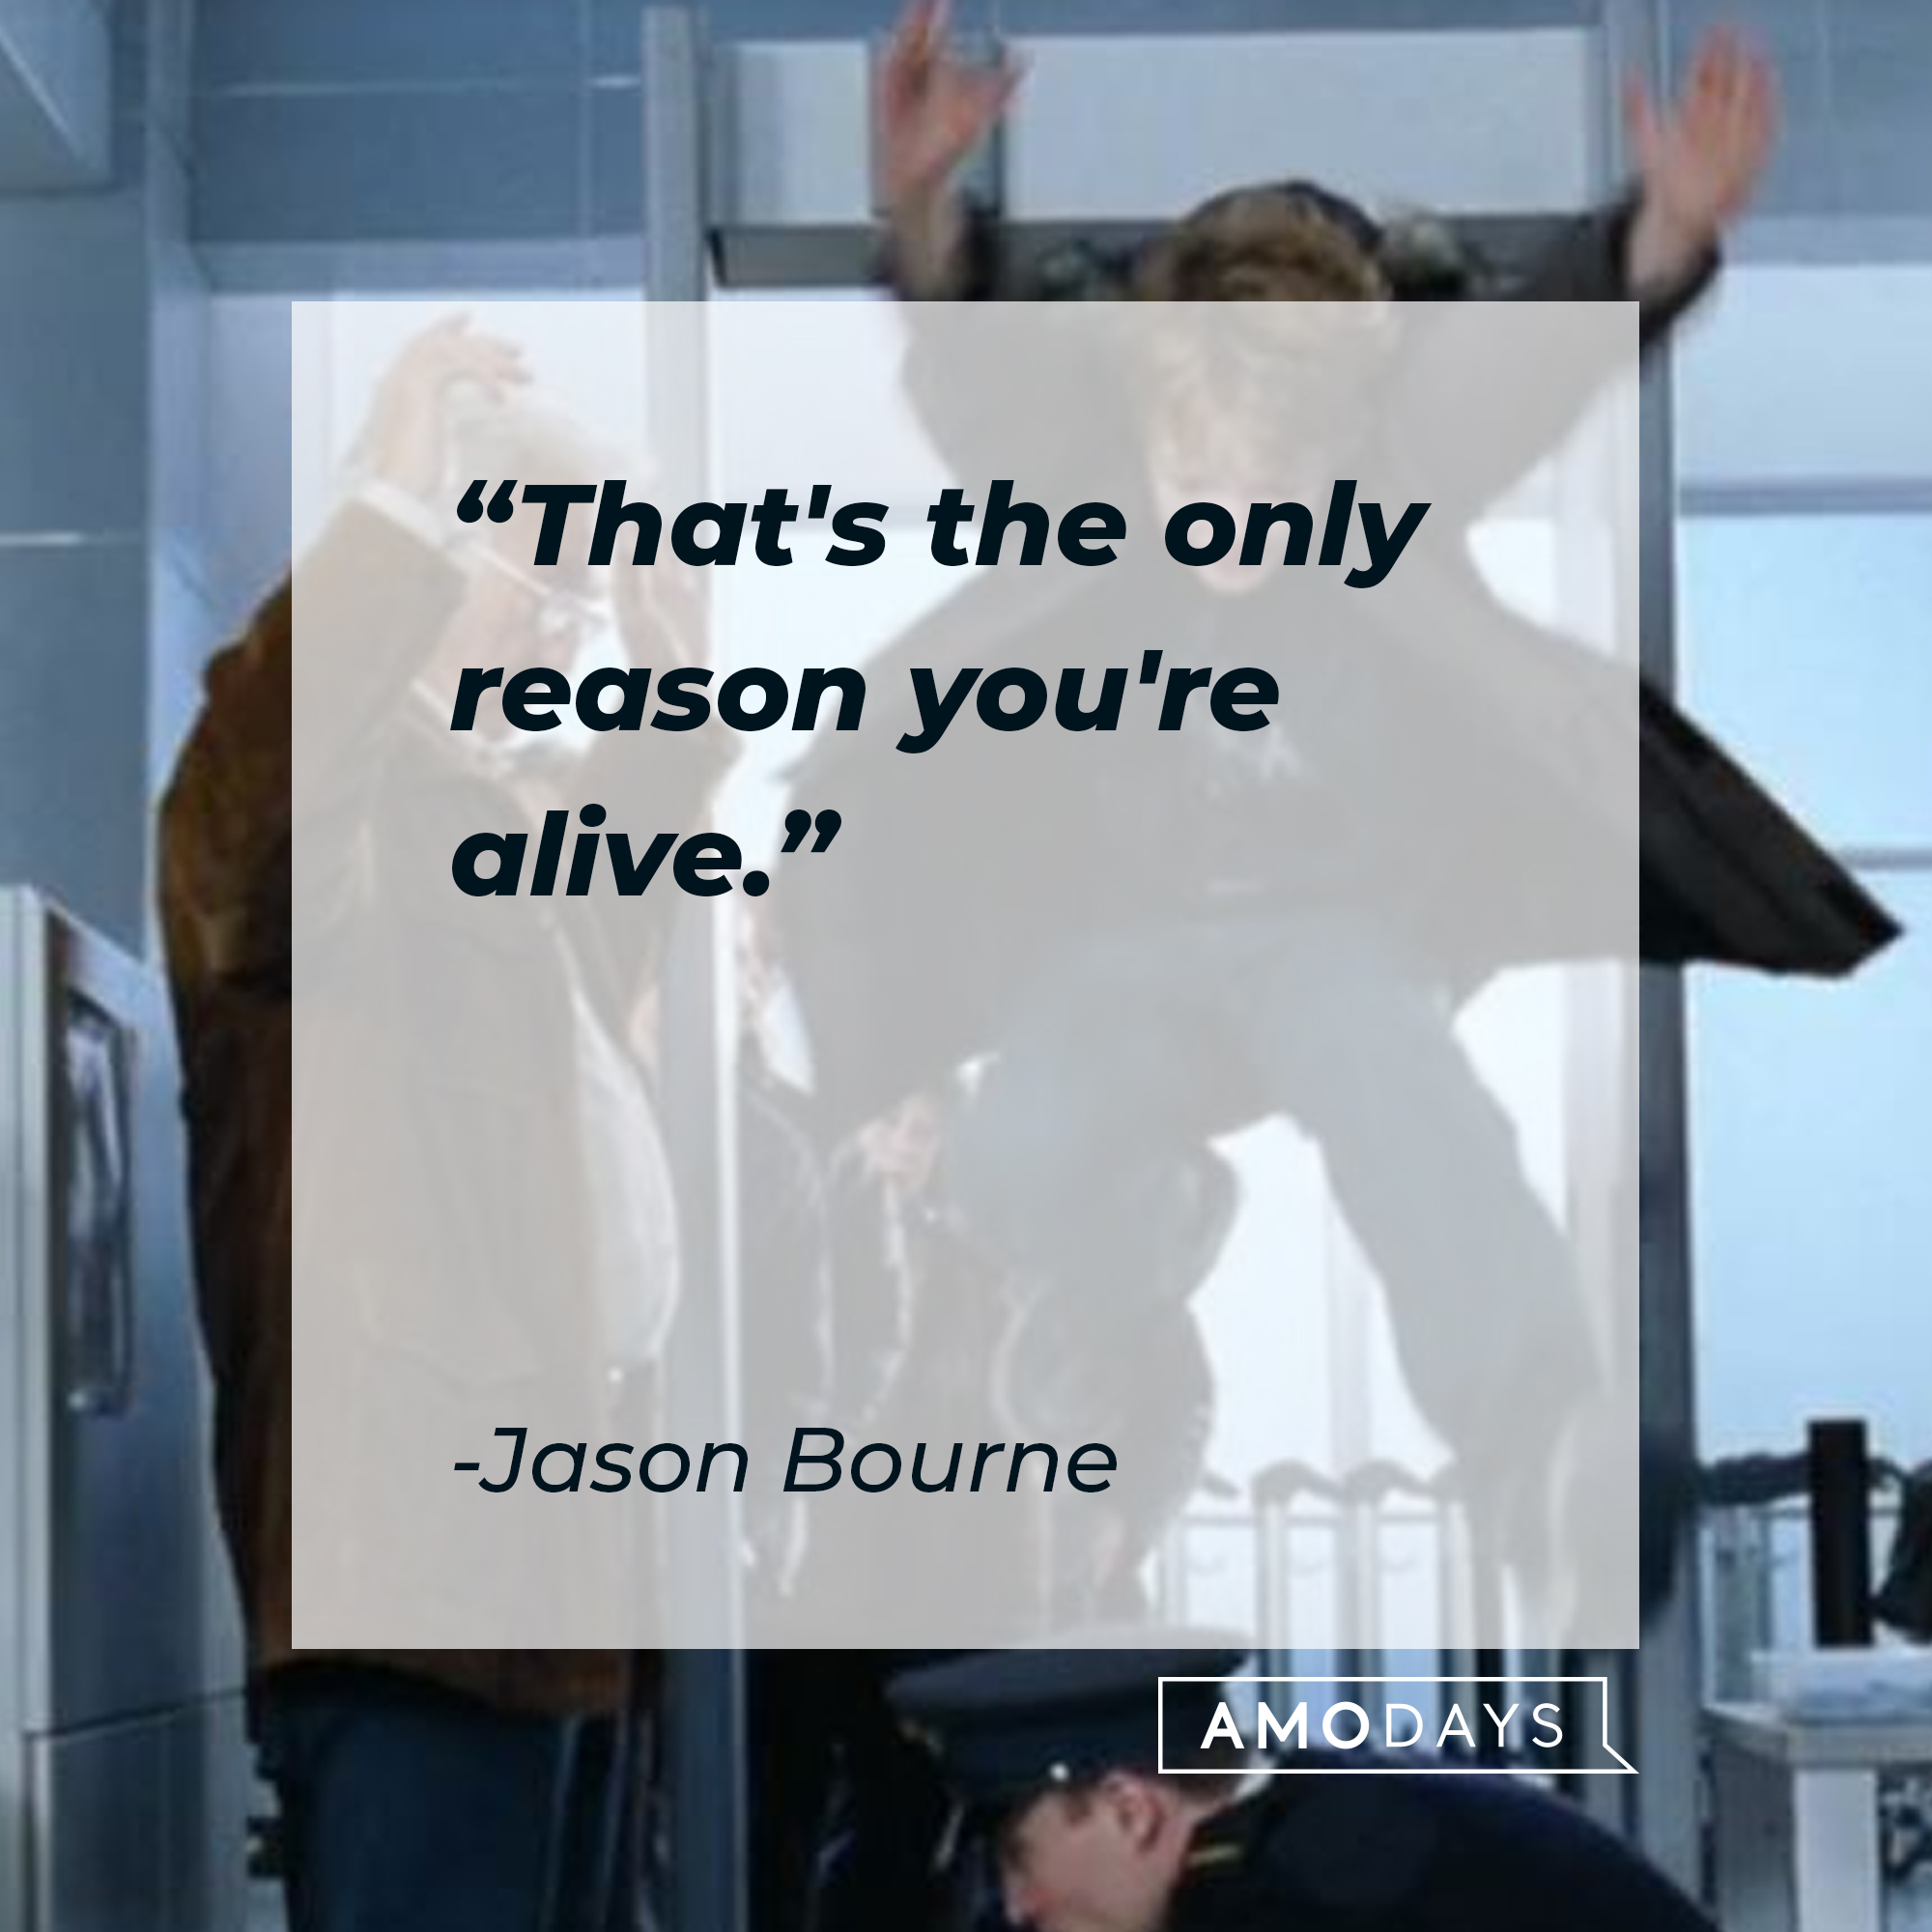 Jason Bourne's quote: "That's the only reason you're alive." | Source: facebook.com/TheBourneSeries